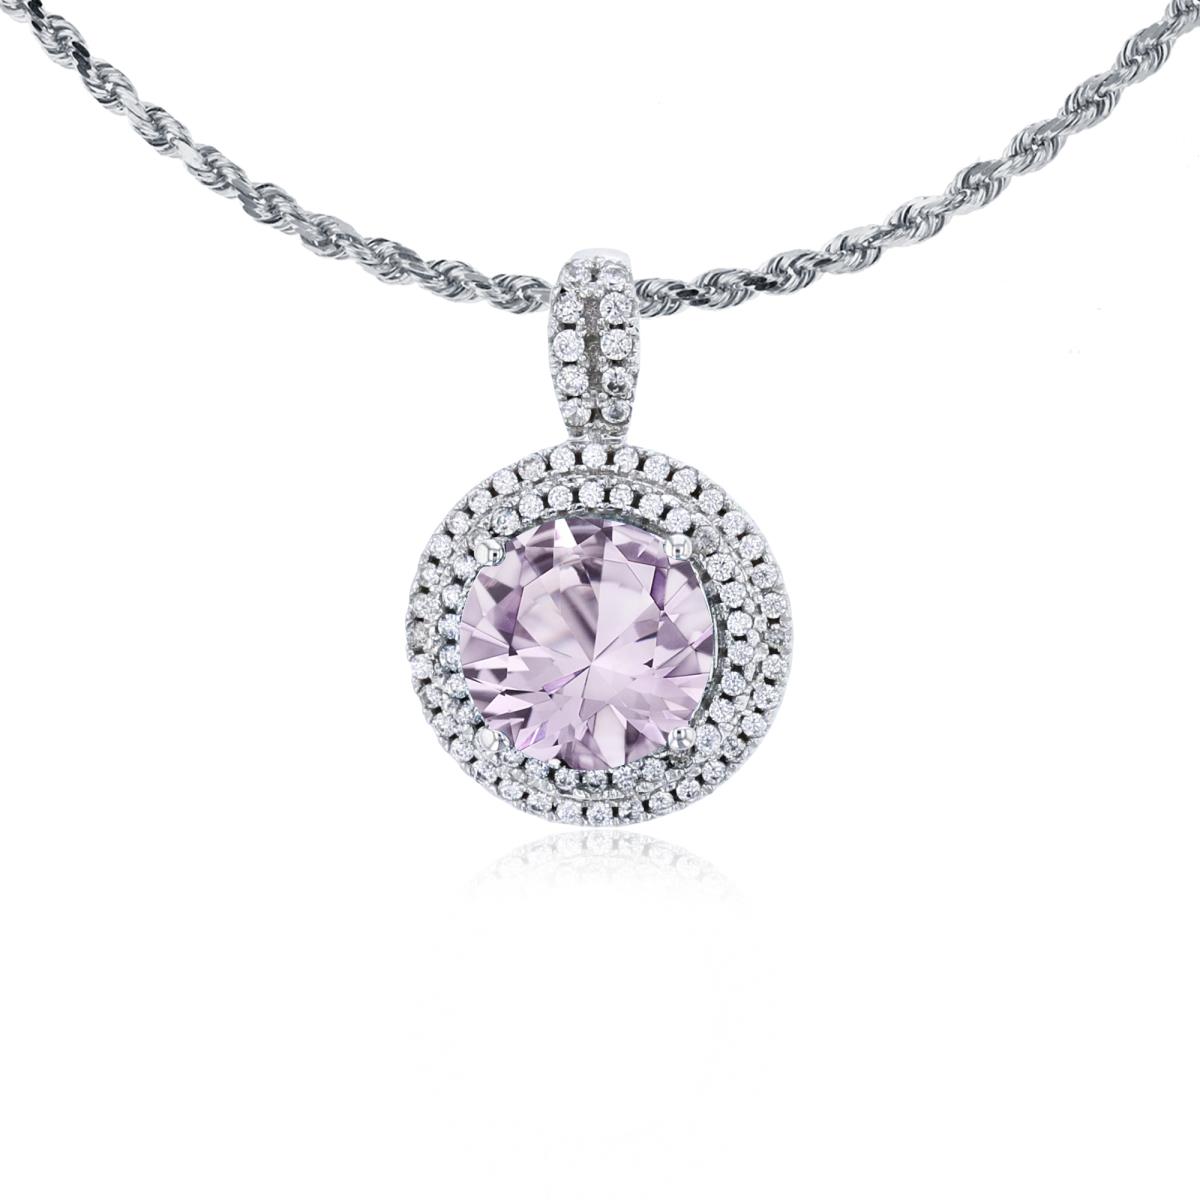 10K White Gold 7mm Round Rose De France & 0.25 CTTW Diamonds Double Halo 18" Rope Chain Necklace